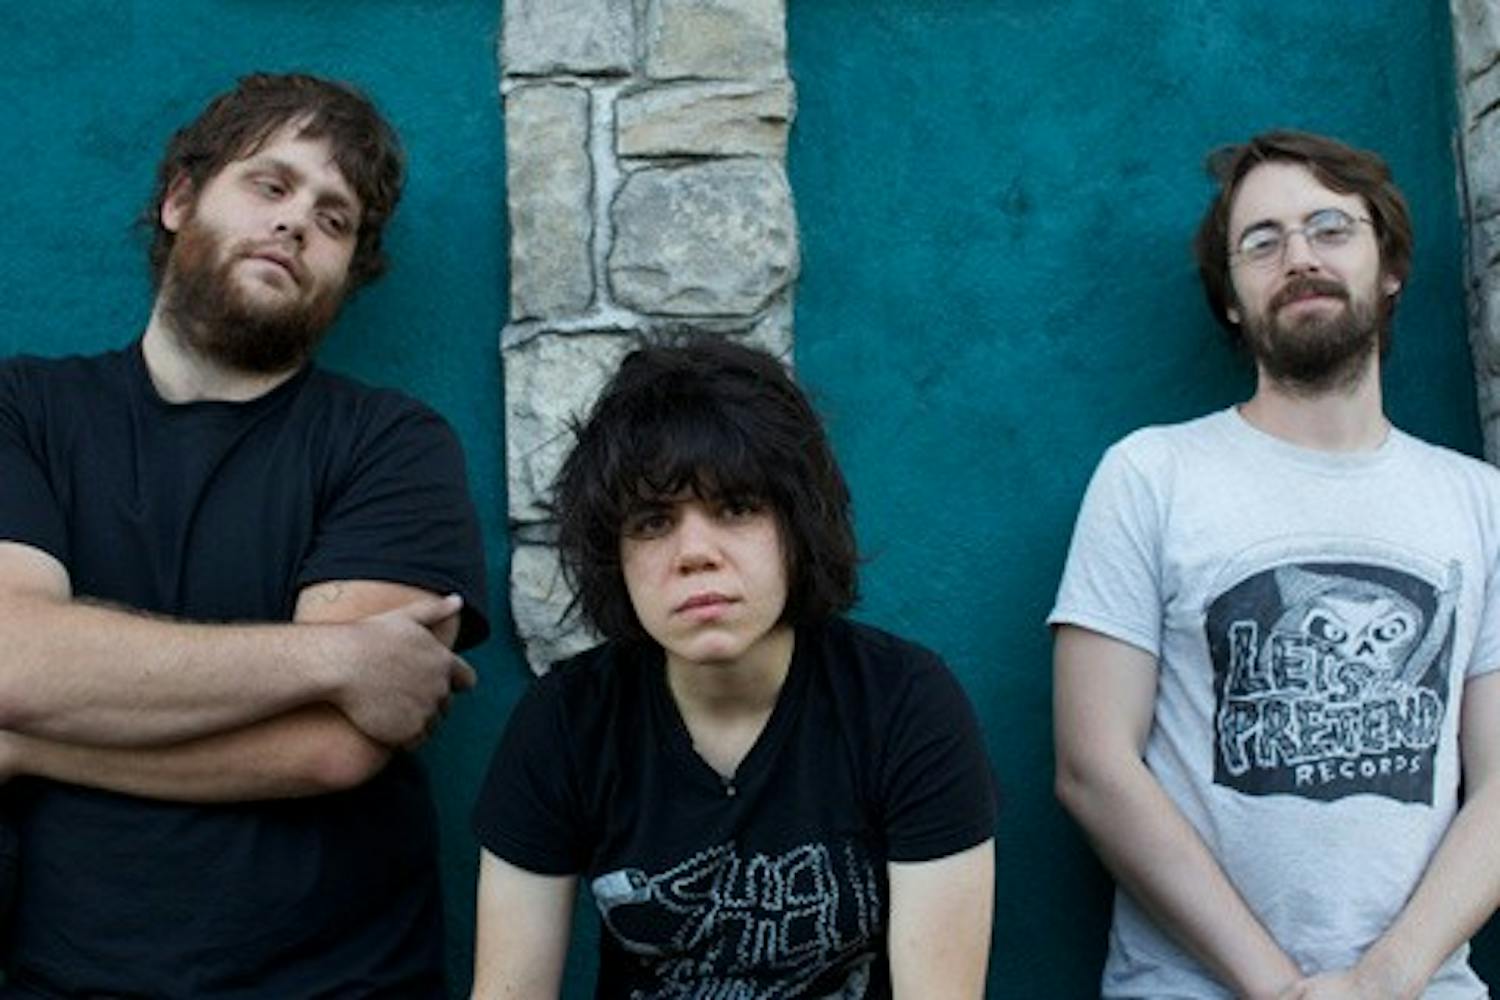 Punk rock trio Screaming Females will perform at the Pinhook in Durham this Thursday, Aug. 27.